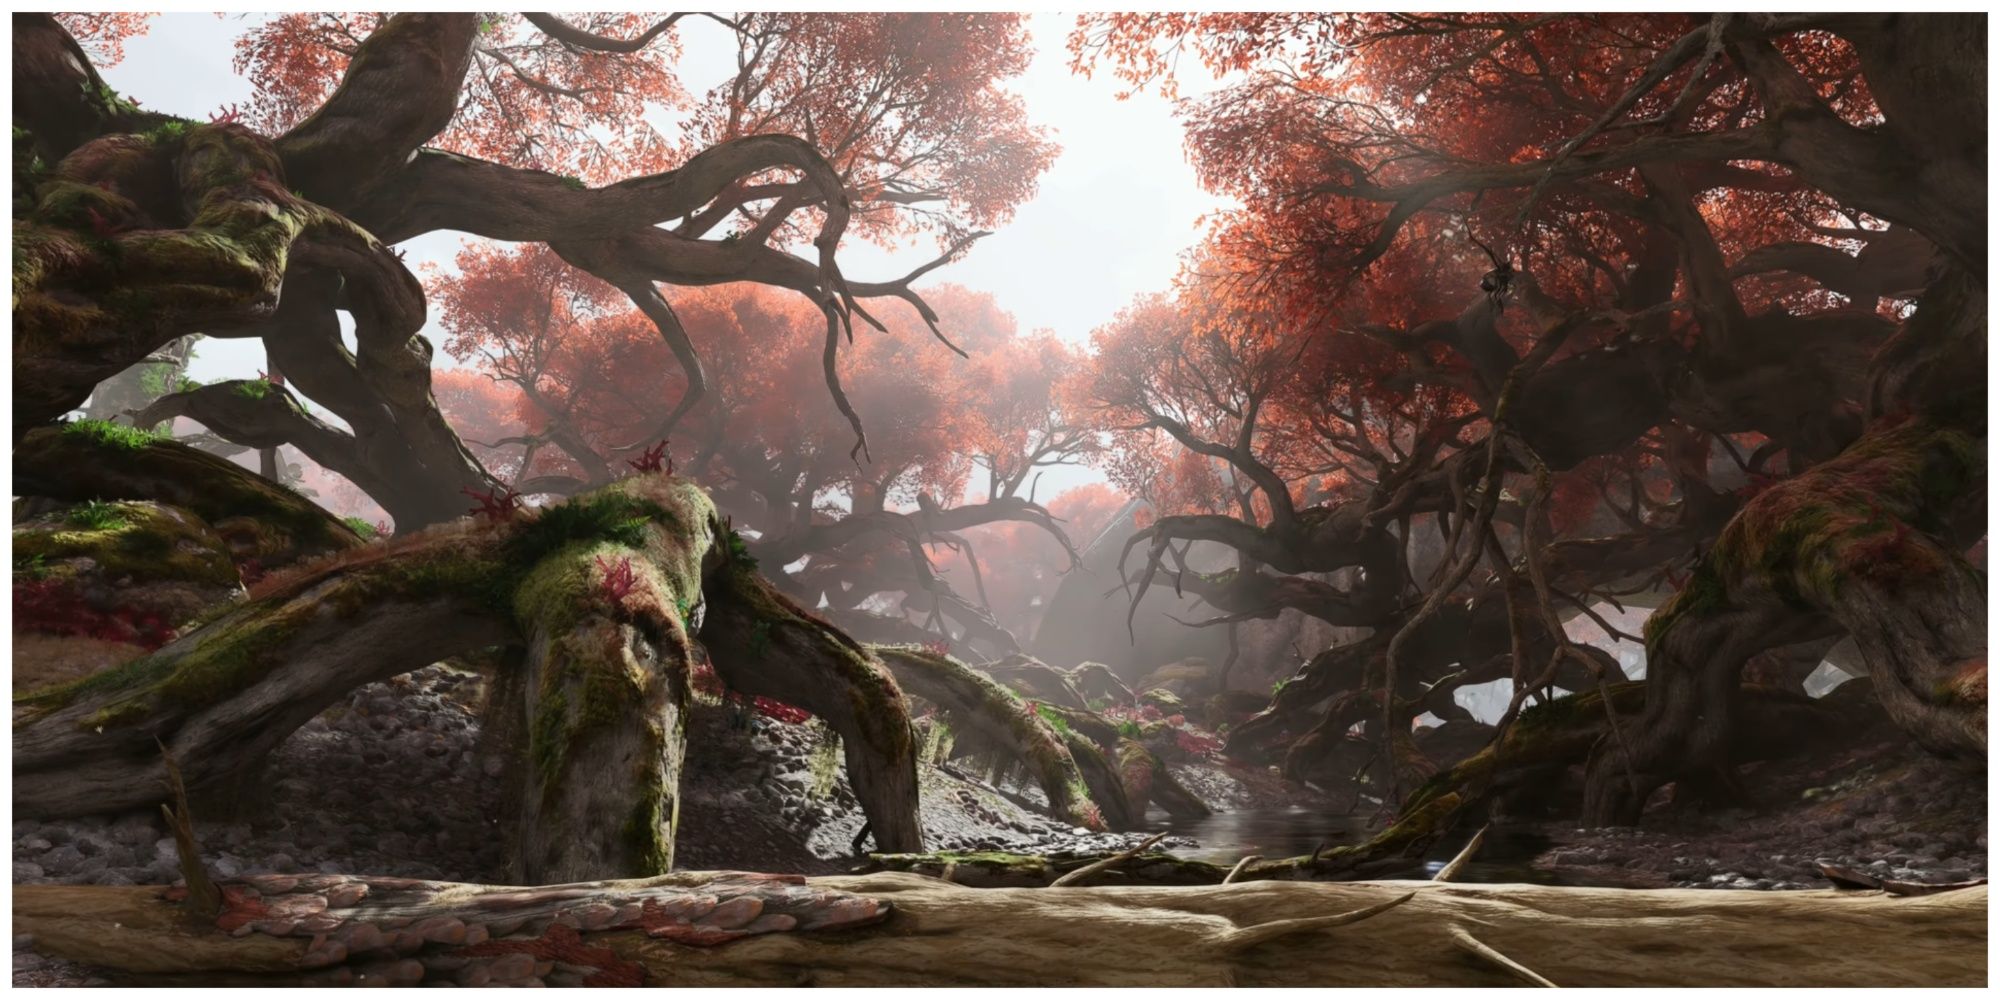 Avatar frontiers of pandora autumn leaves forest near the river screenshot